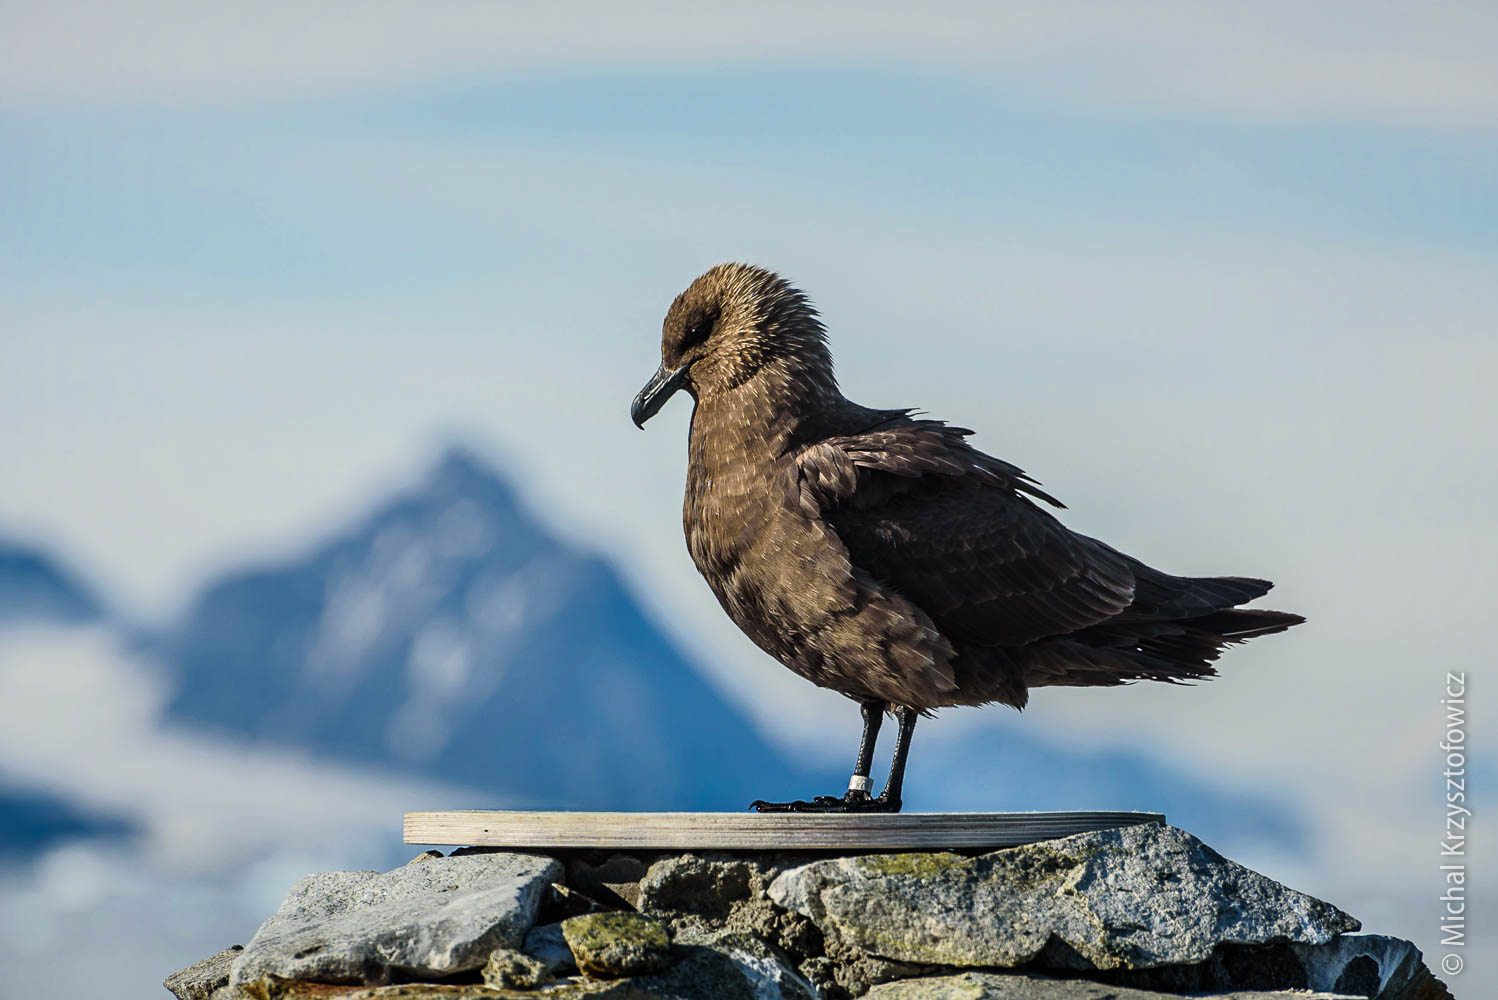 Skua resting on a monument at The Cross